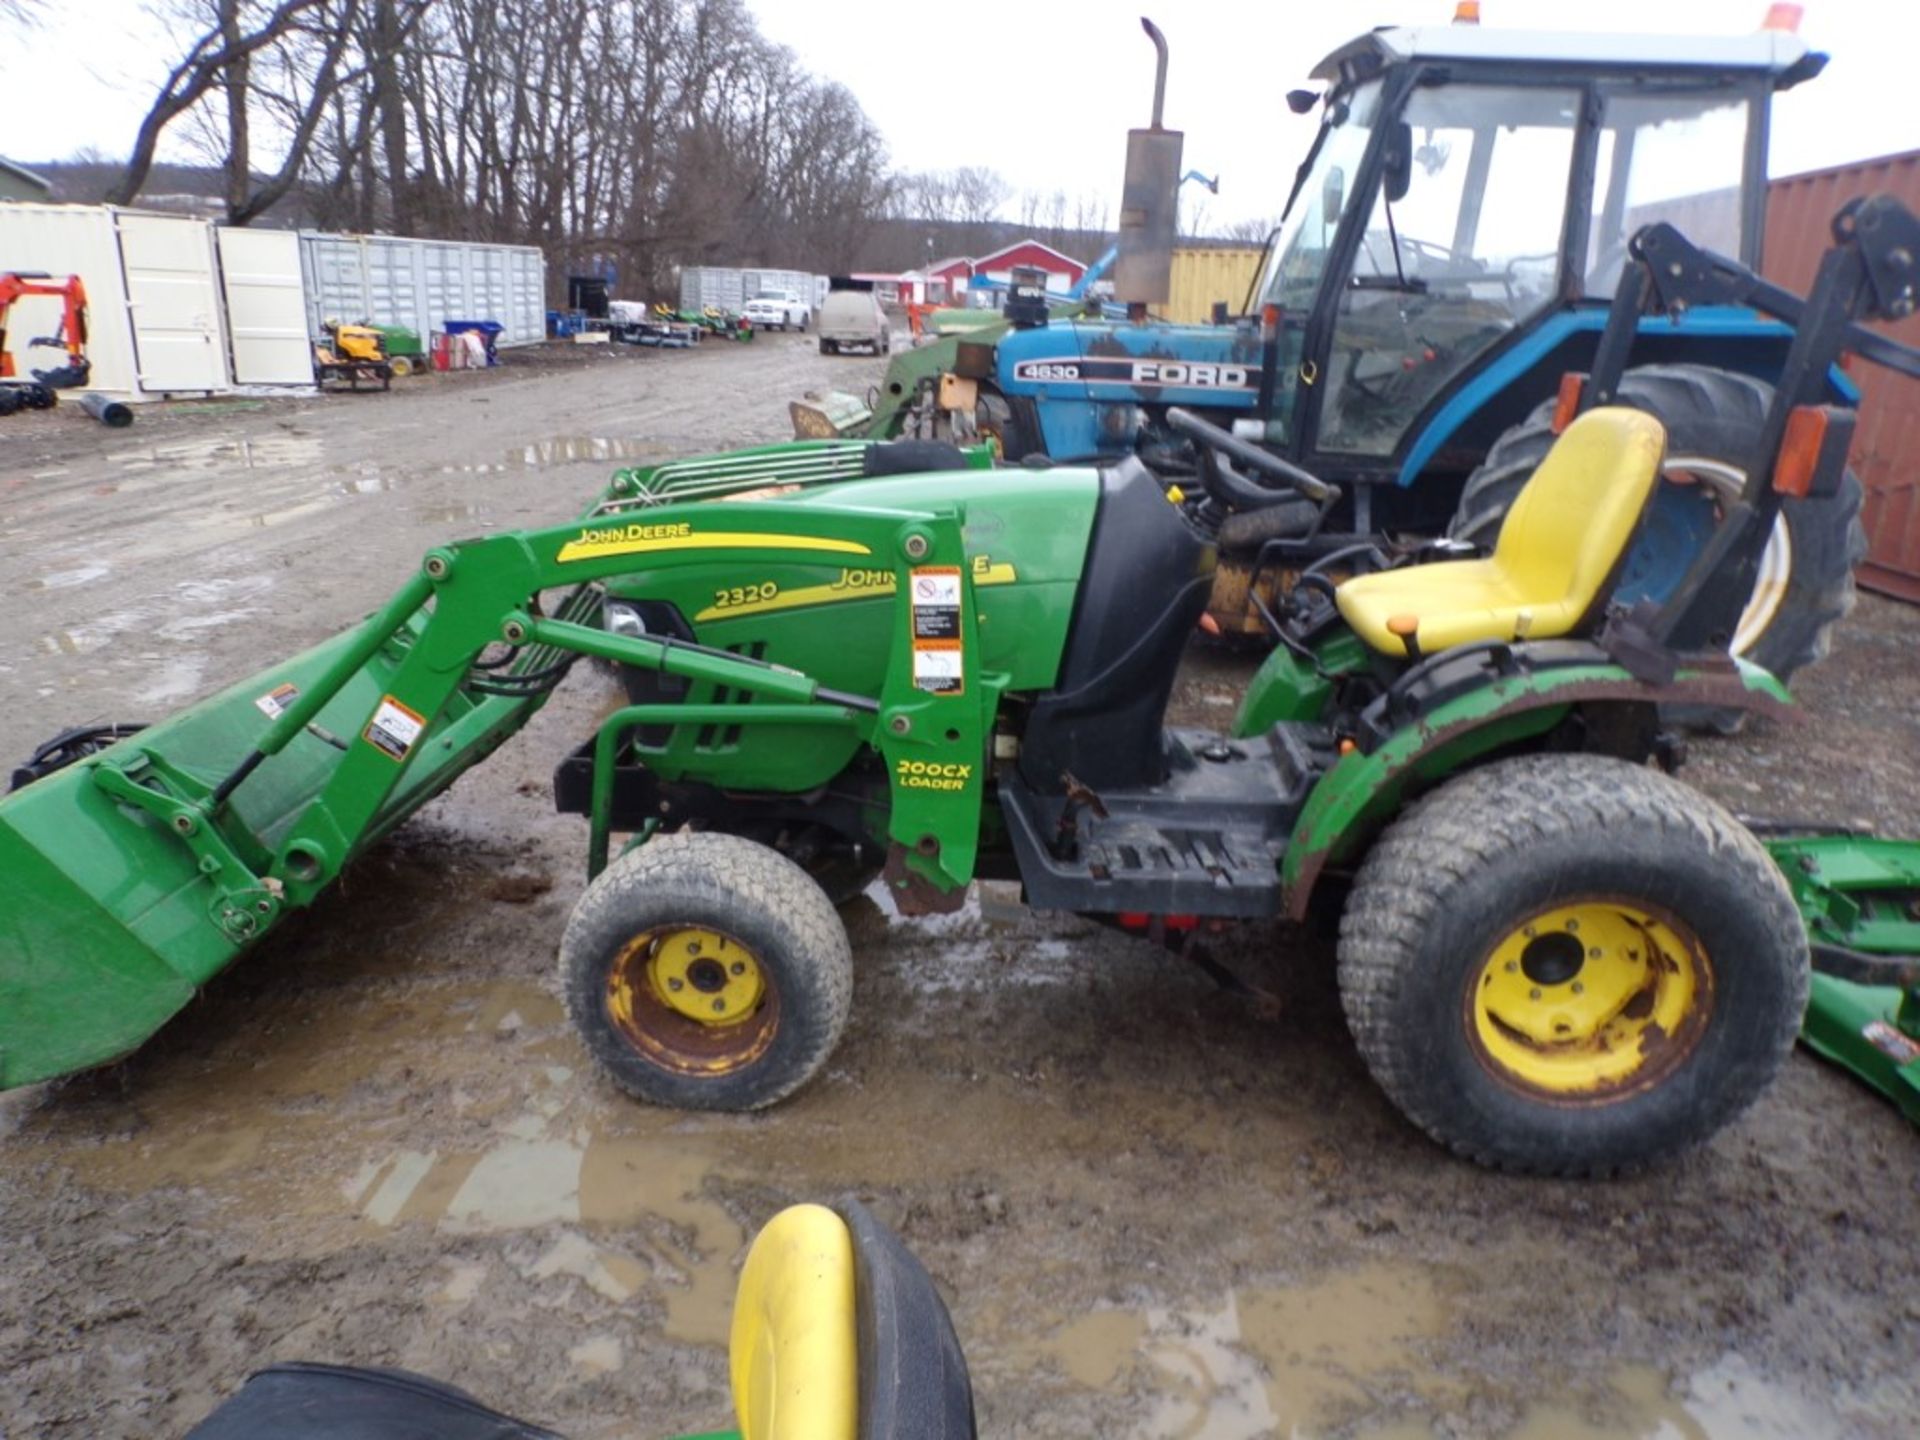 John Deere 2320 4 WD Compact With 200 CX Loader and 62DI (60'') Deck, Hydro, R.O.P.S., PTO, 3 PT,